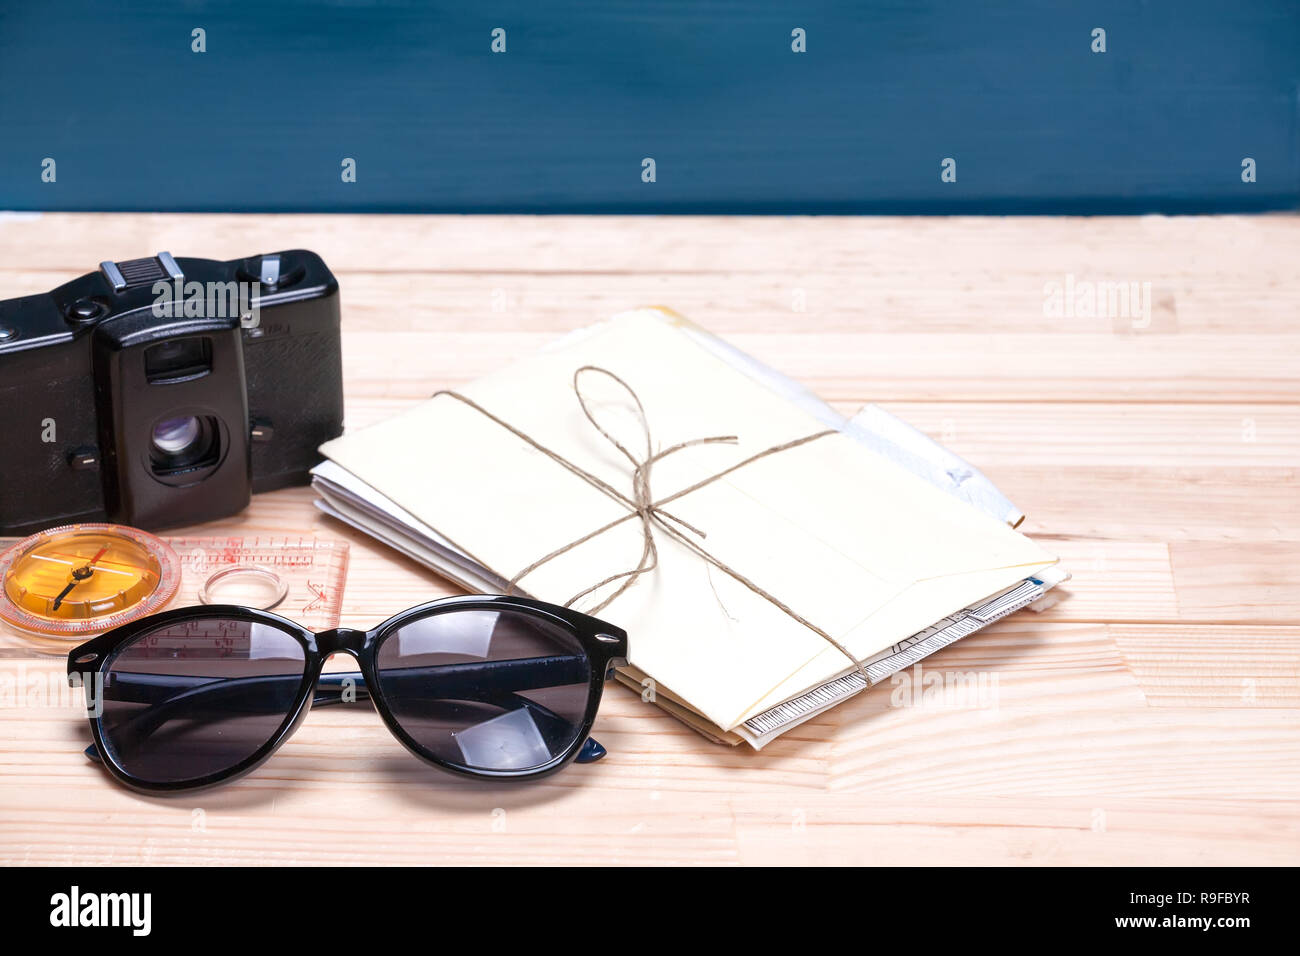 Sunglasses, compass, old film camera and a bunch of letters on a light and blue wooden background. Copy space to the right. Concept of summer travel d Stock Photo